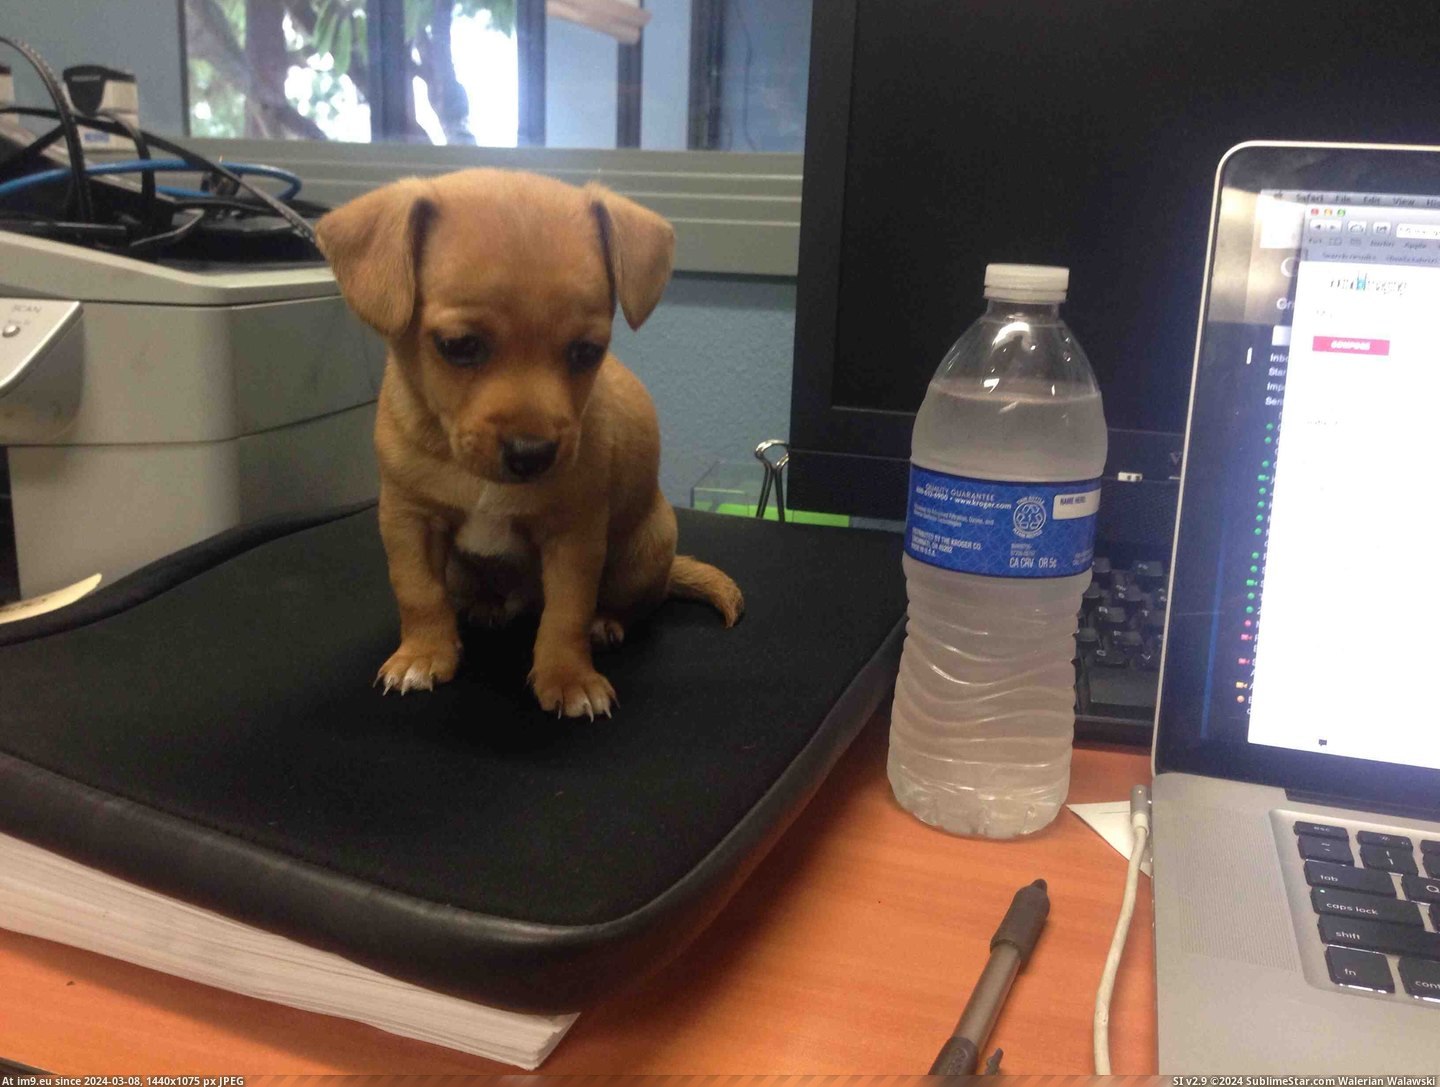 #Work #Desk #Guy [Aww] Came to work and found this little guy on my desk Pic. (Bild von album My r/AWW favs))